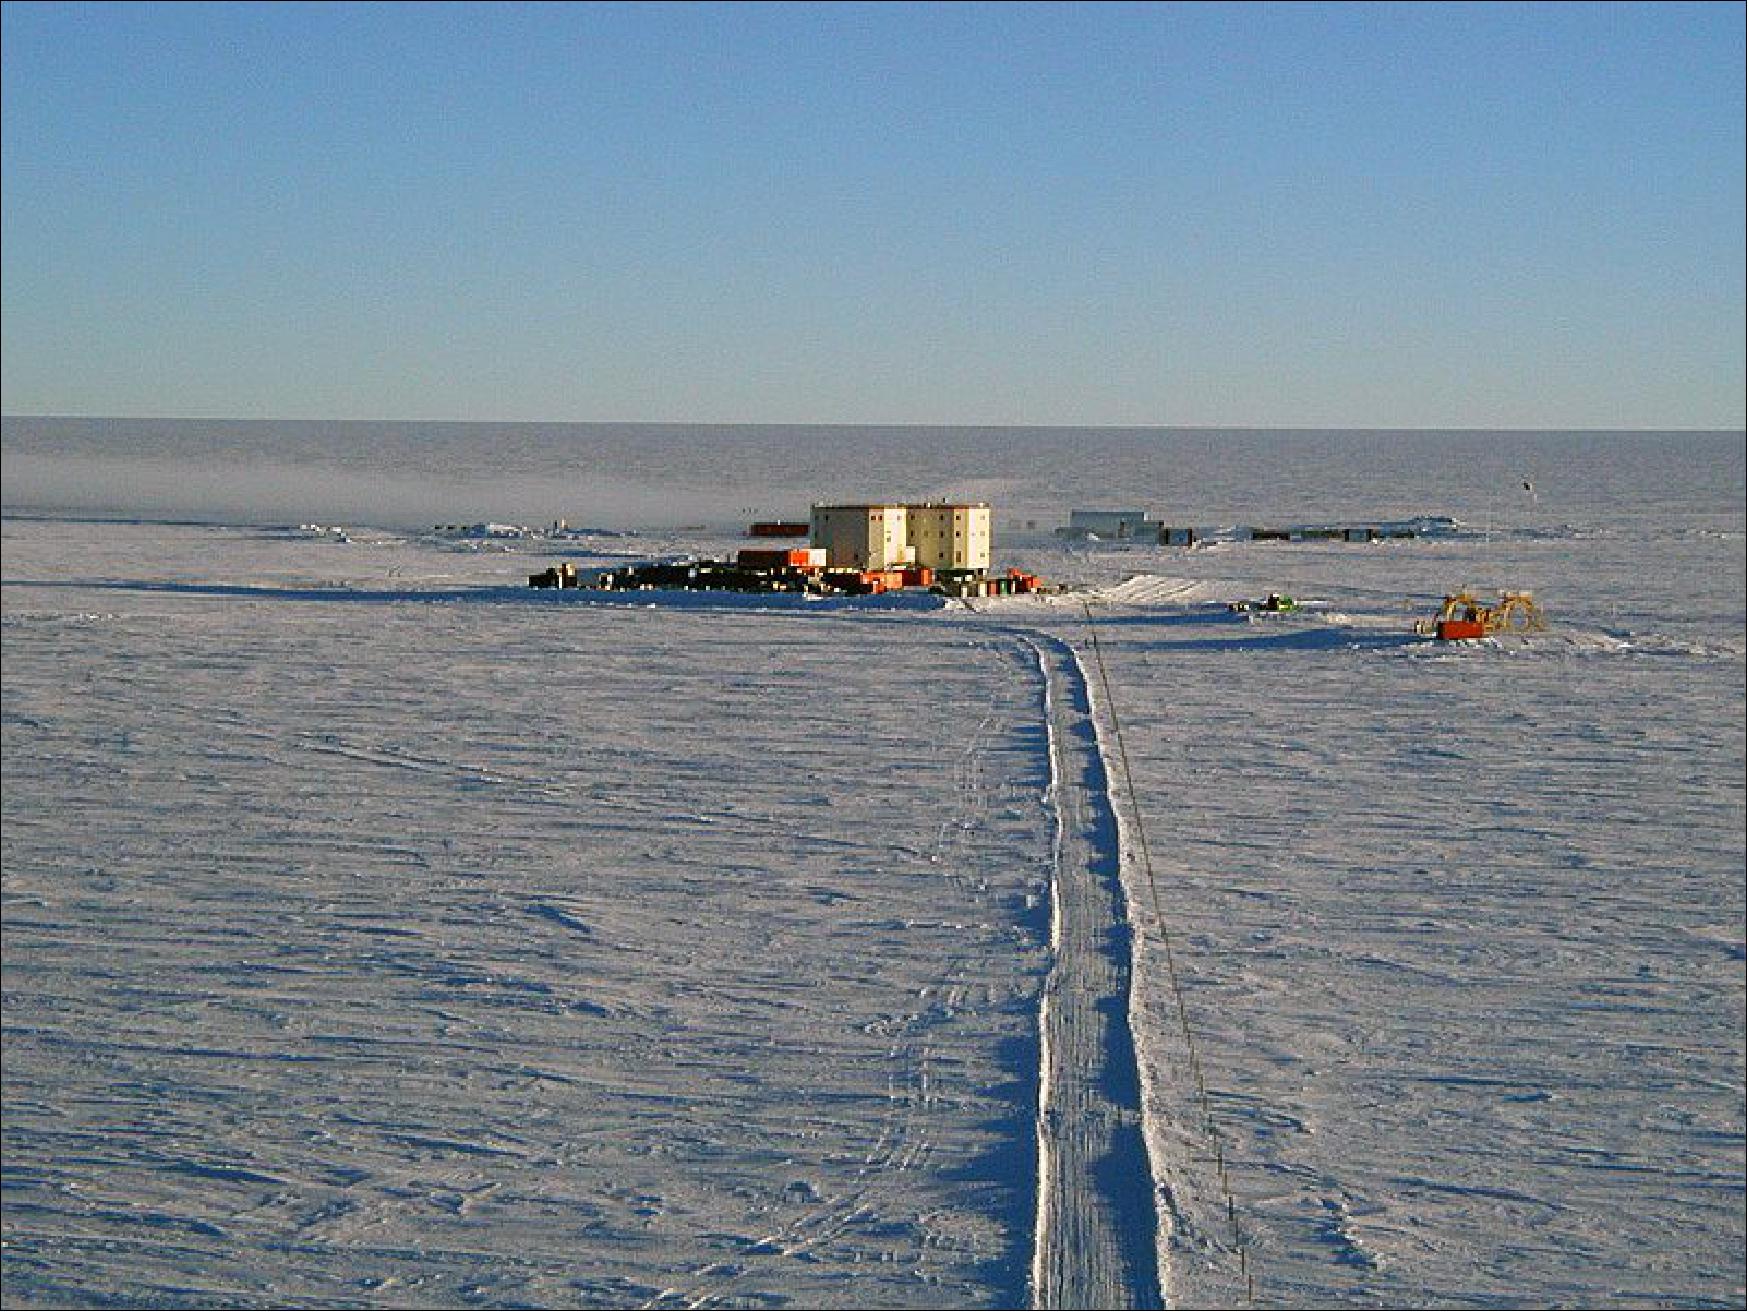 Figure 2: Photo of the Concordia Research Station at Dome C seen from the top of a 32-meter tower located about 1 km from the station. The summer station is visible behind the new (still under construction at that time) winter station. The photo was taken just after midnight on 29 January 2005(image credit: Stephen Hudson)